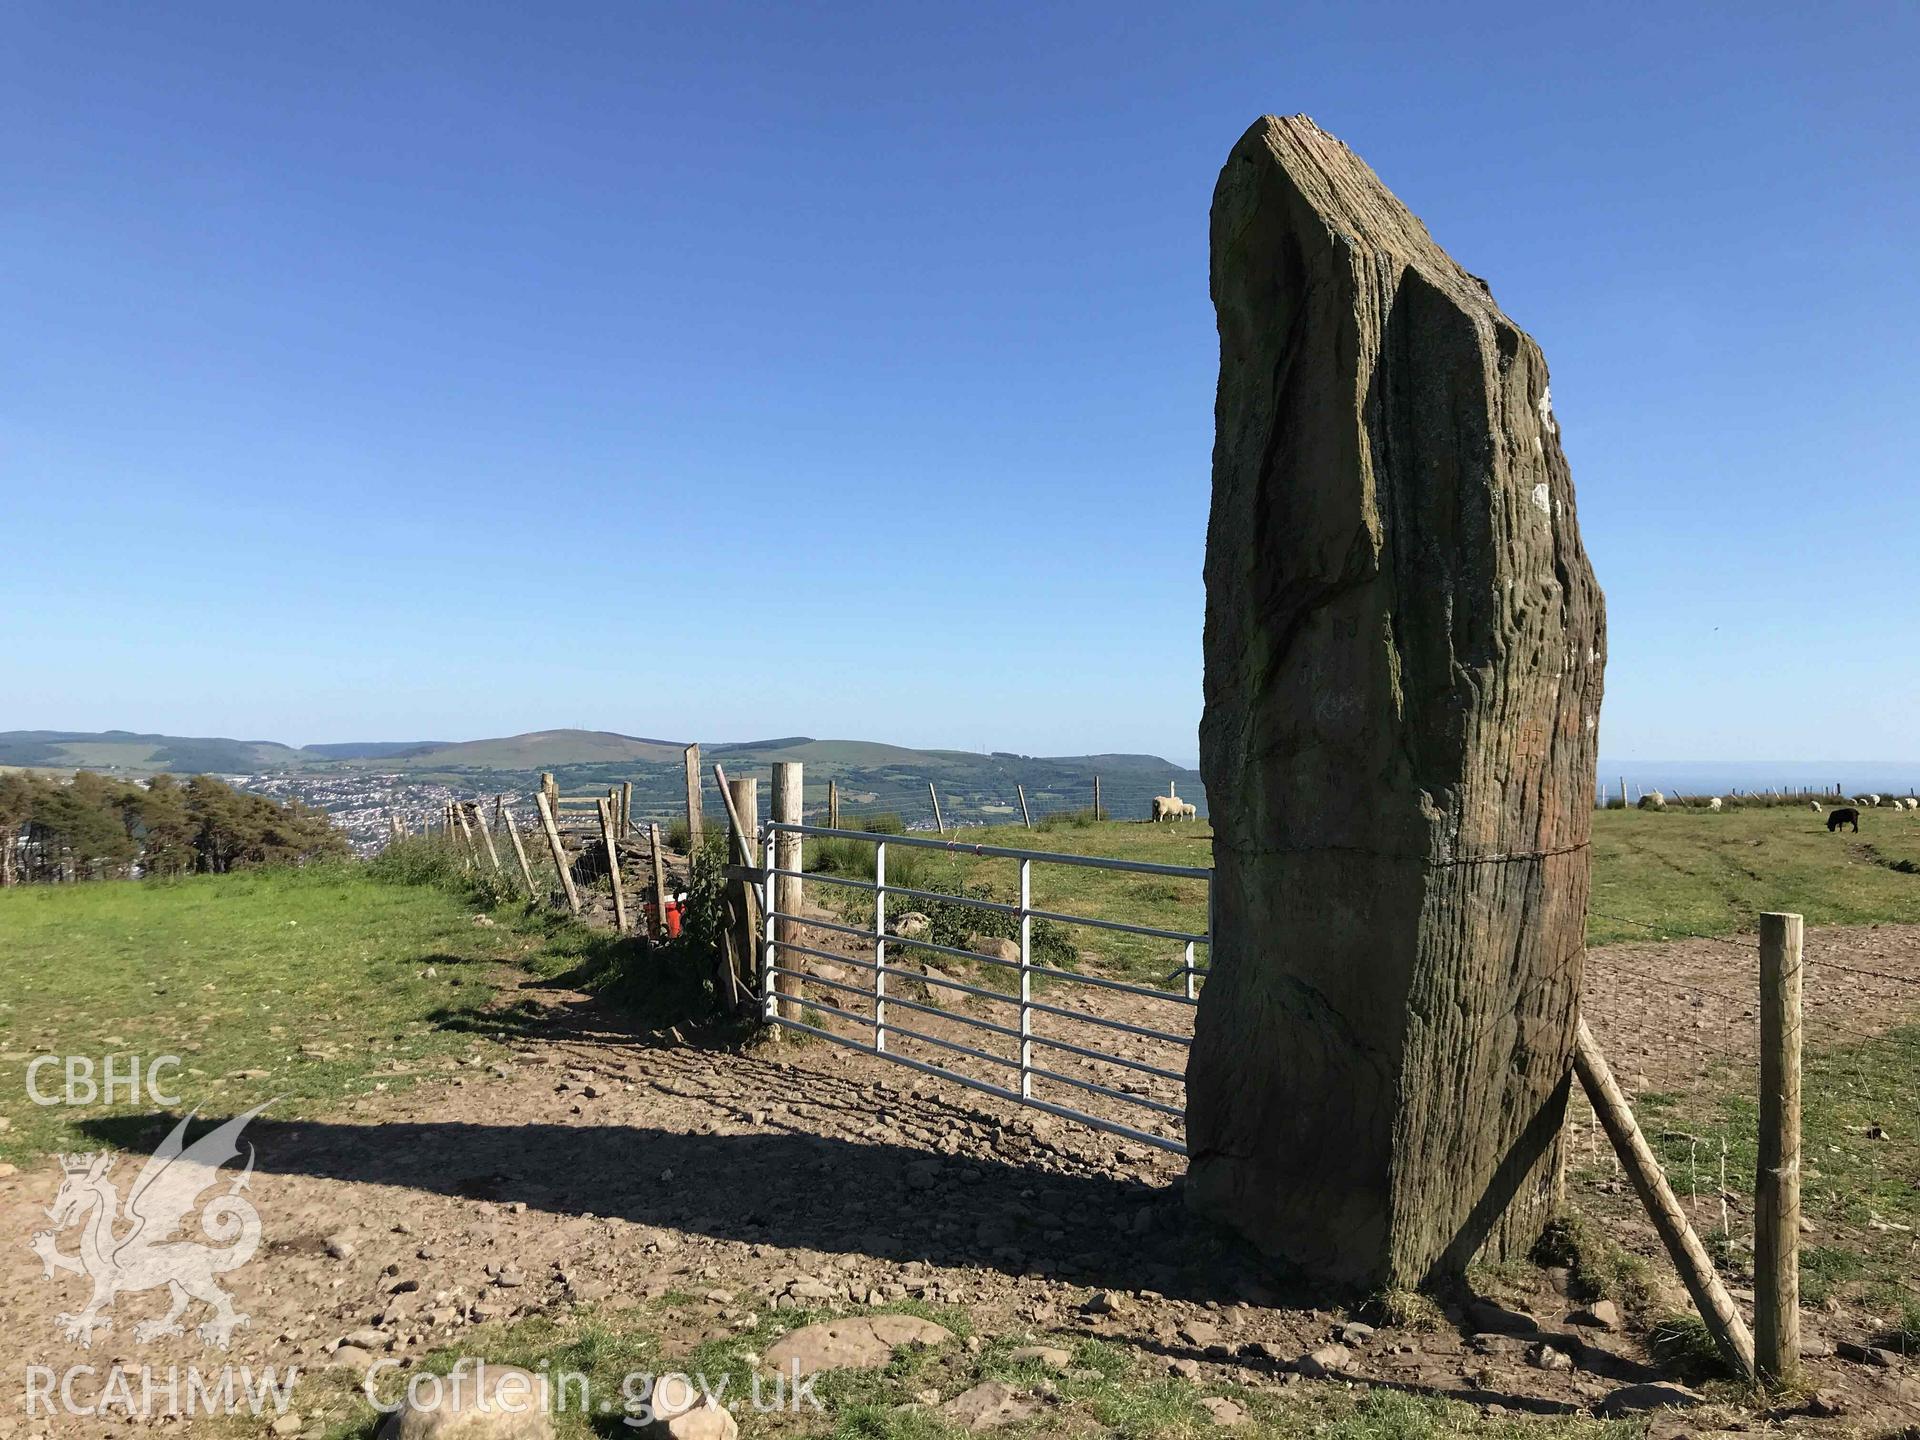 Digital photograph of Carn Bica standing stone, produced by Paul Davis in 2020